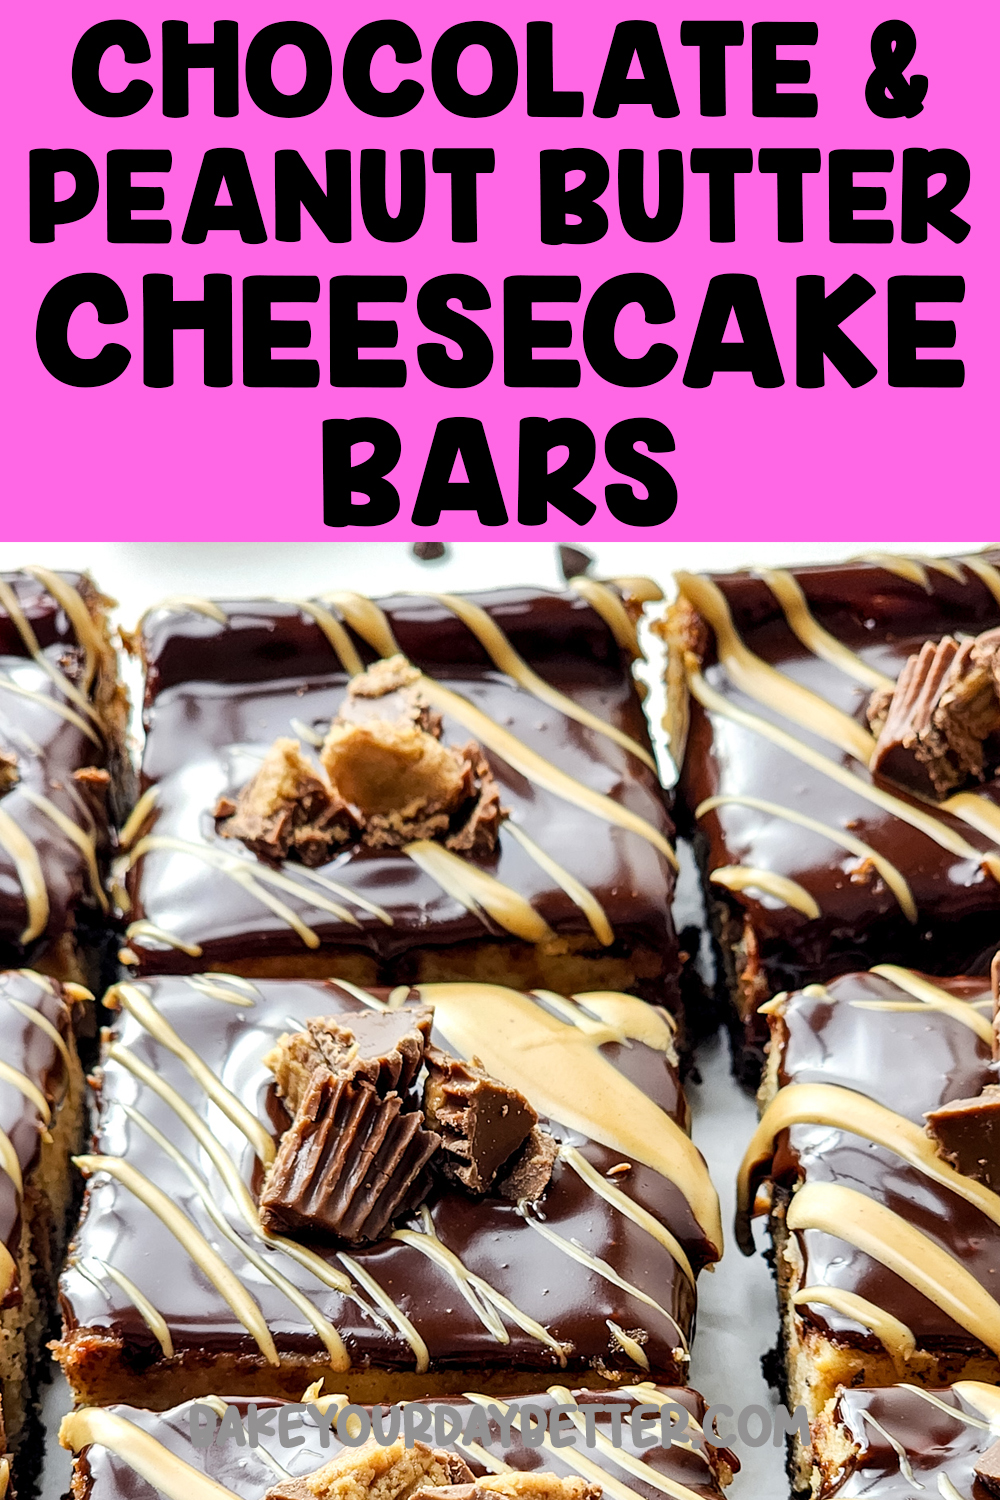 chocolate and peanut butter cheesecake bars